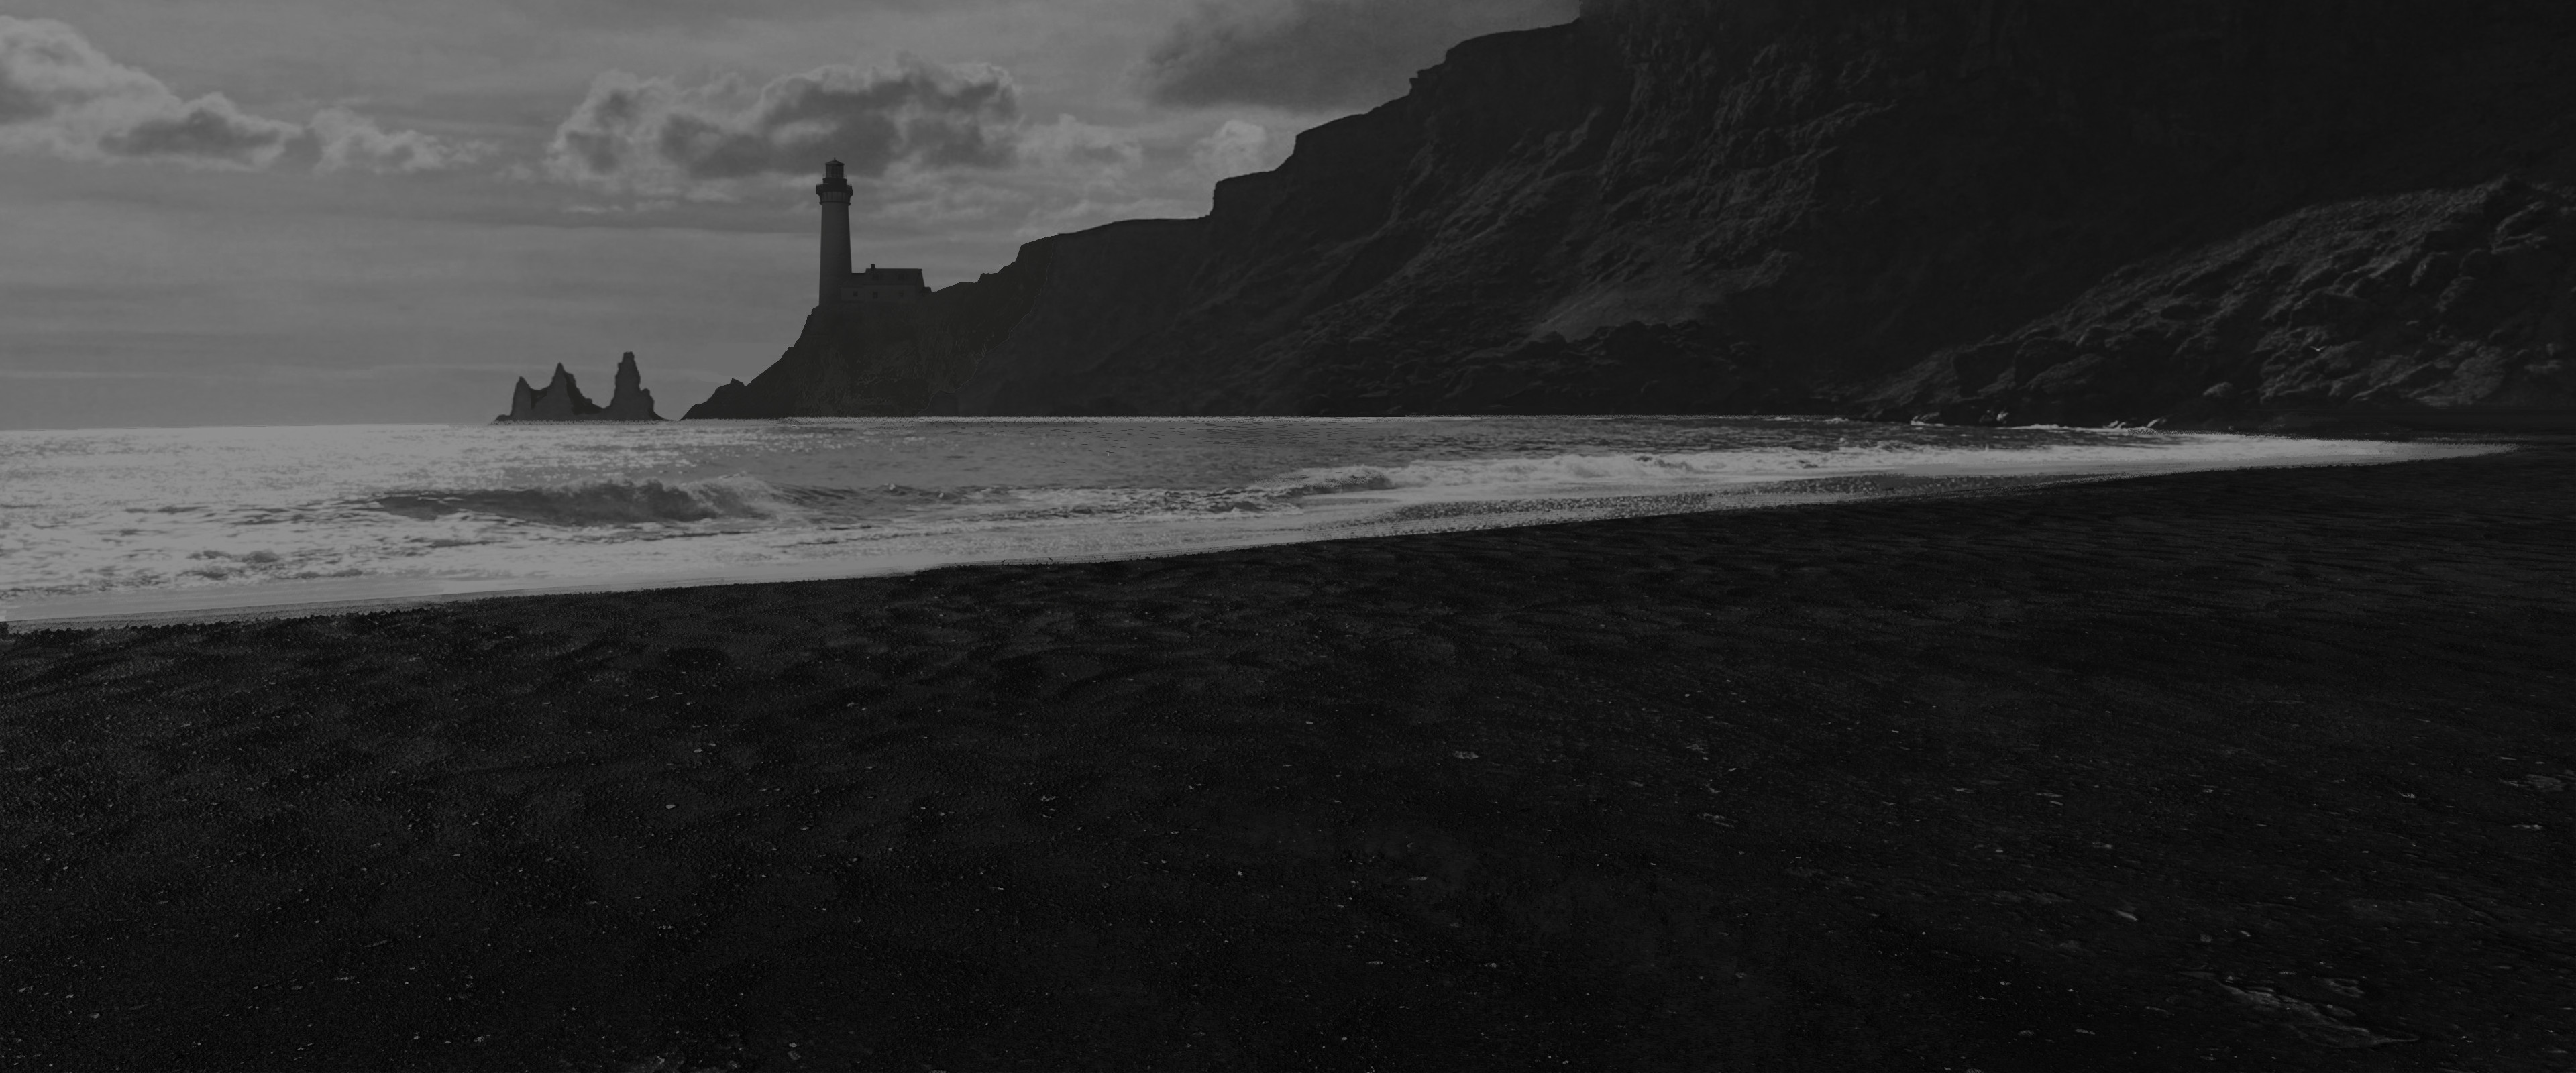 Matte painting #1 - The foreground and lighthouse are 3D. Rest is photobashed